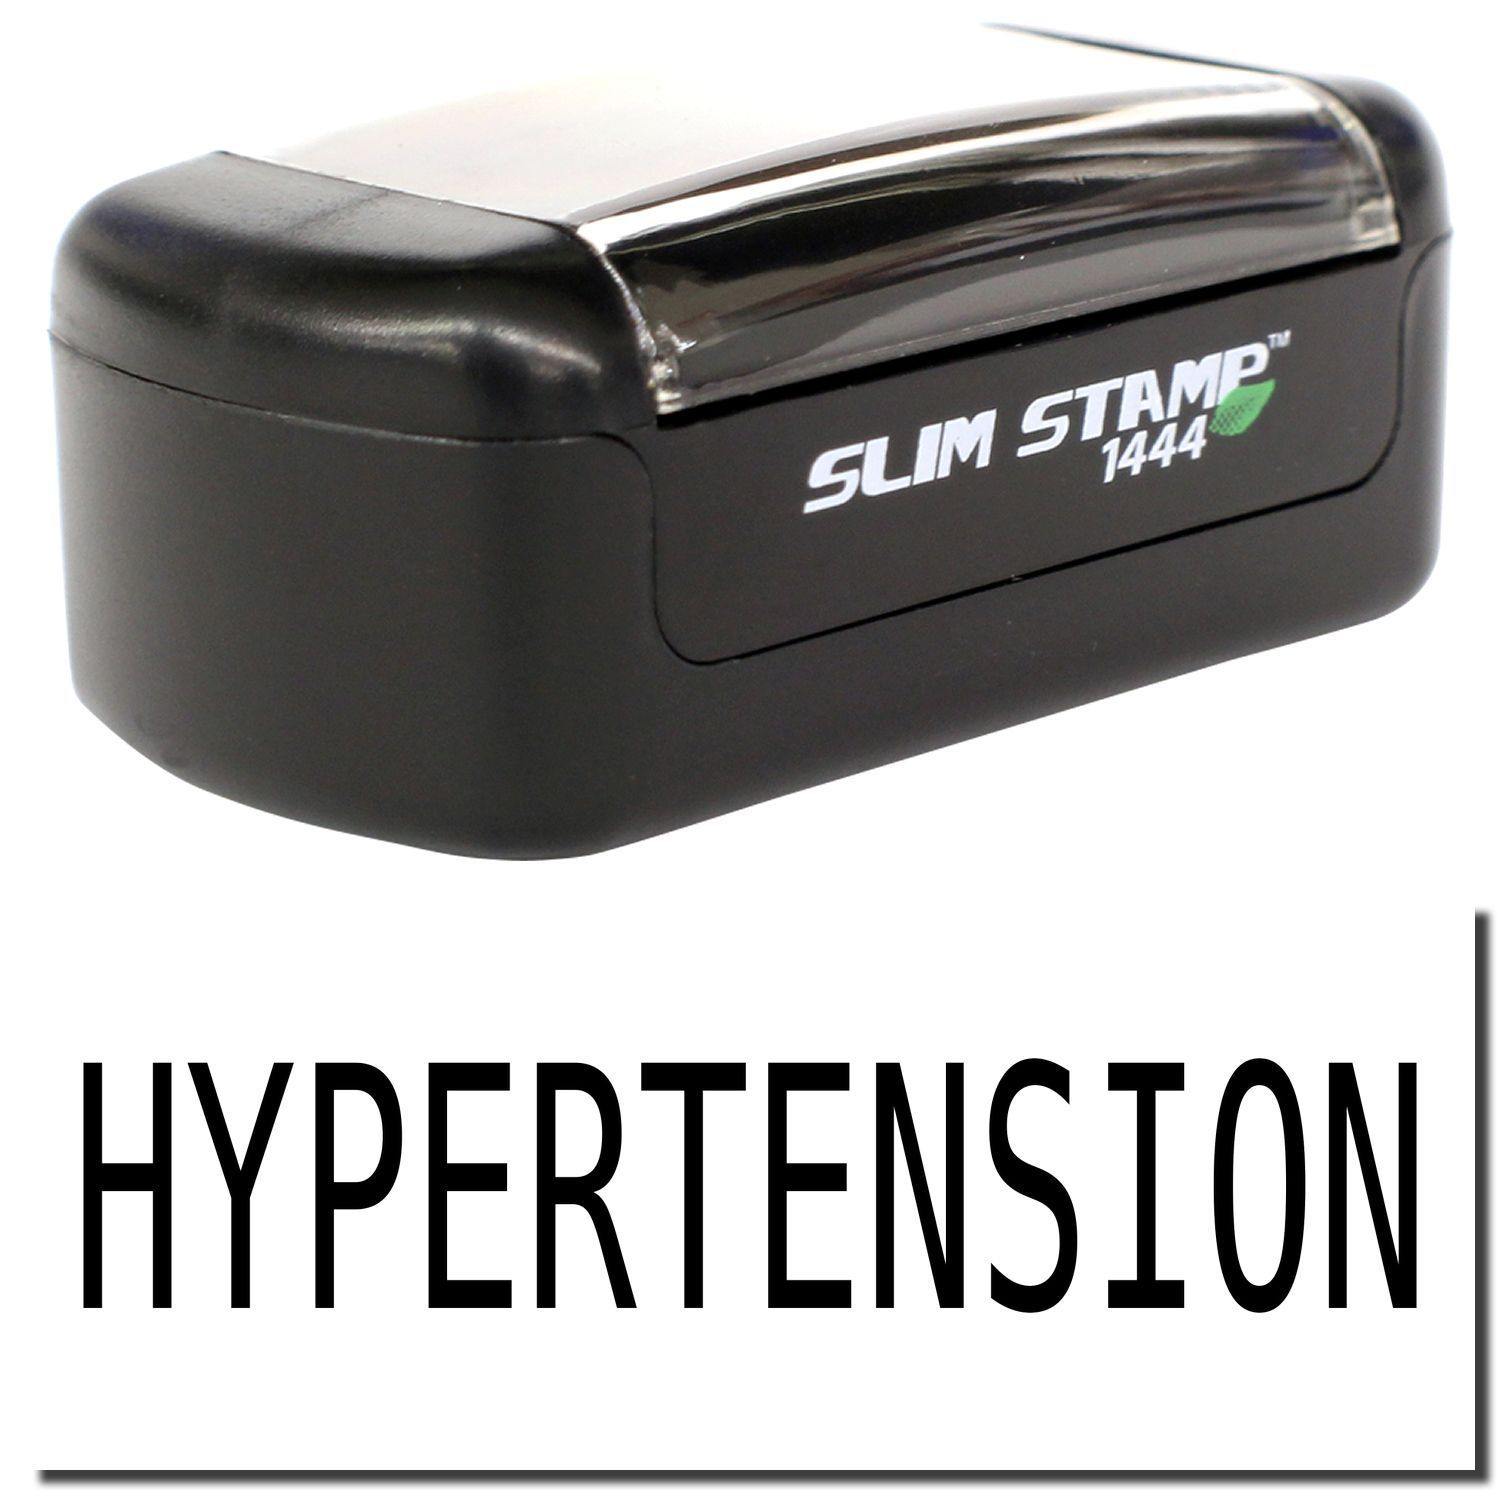 A stock office pre-inked stamp with a stamped image showing how the text "HYPERTENSION" is displayed after stamping.